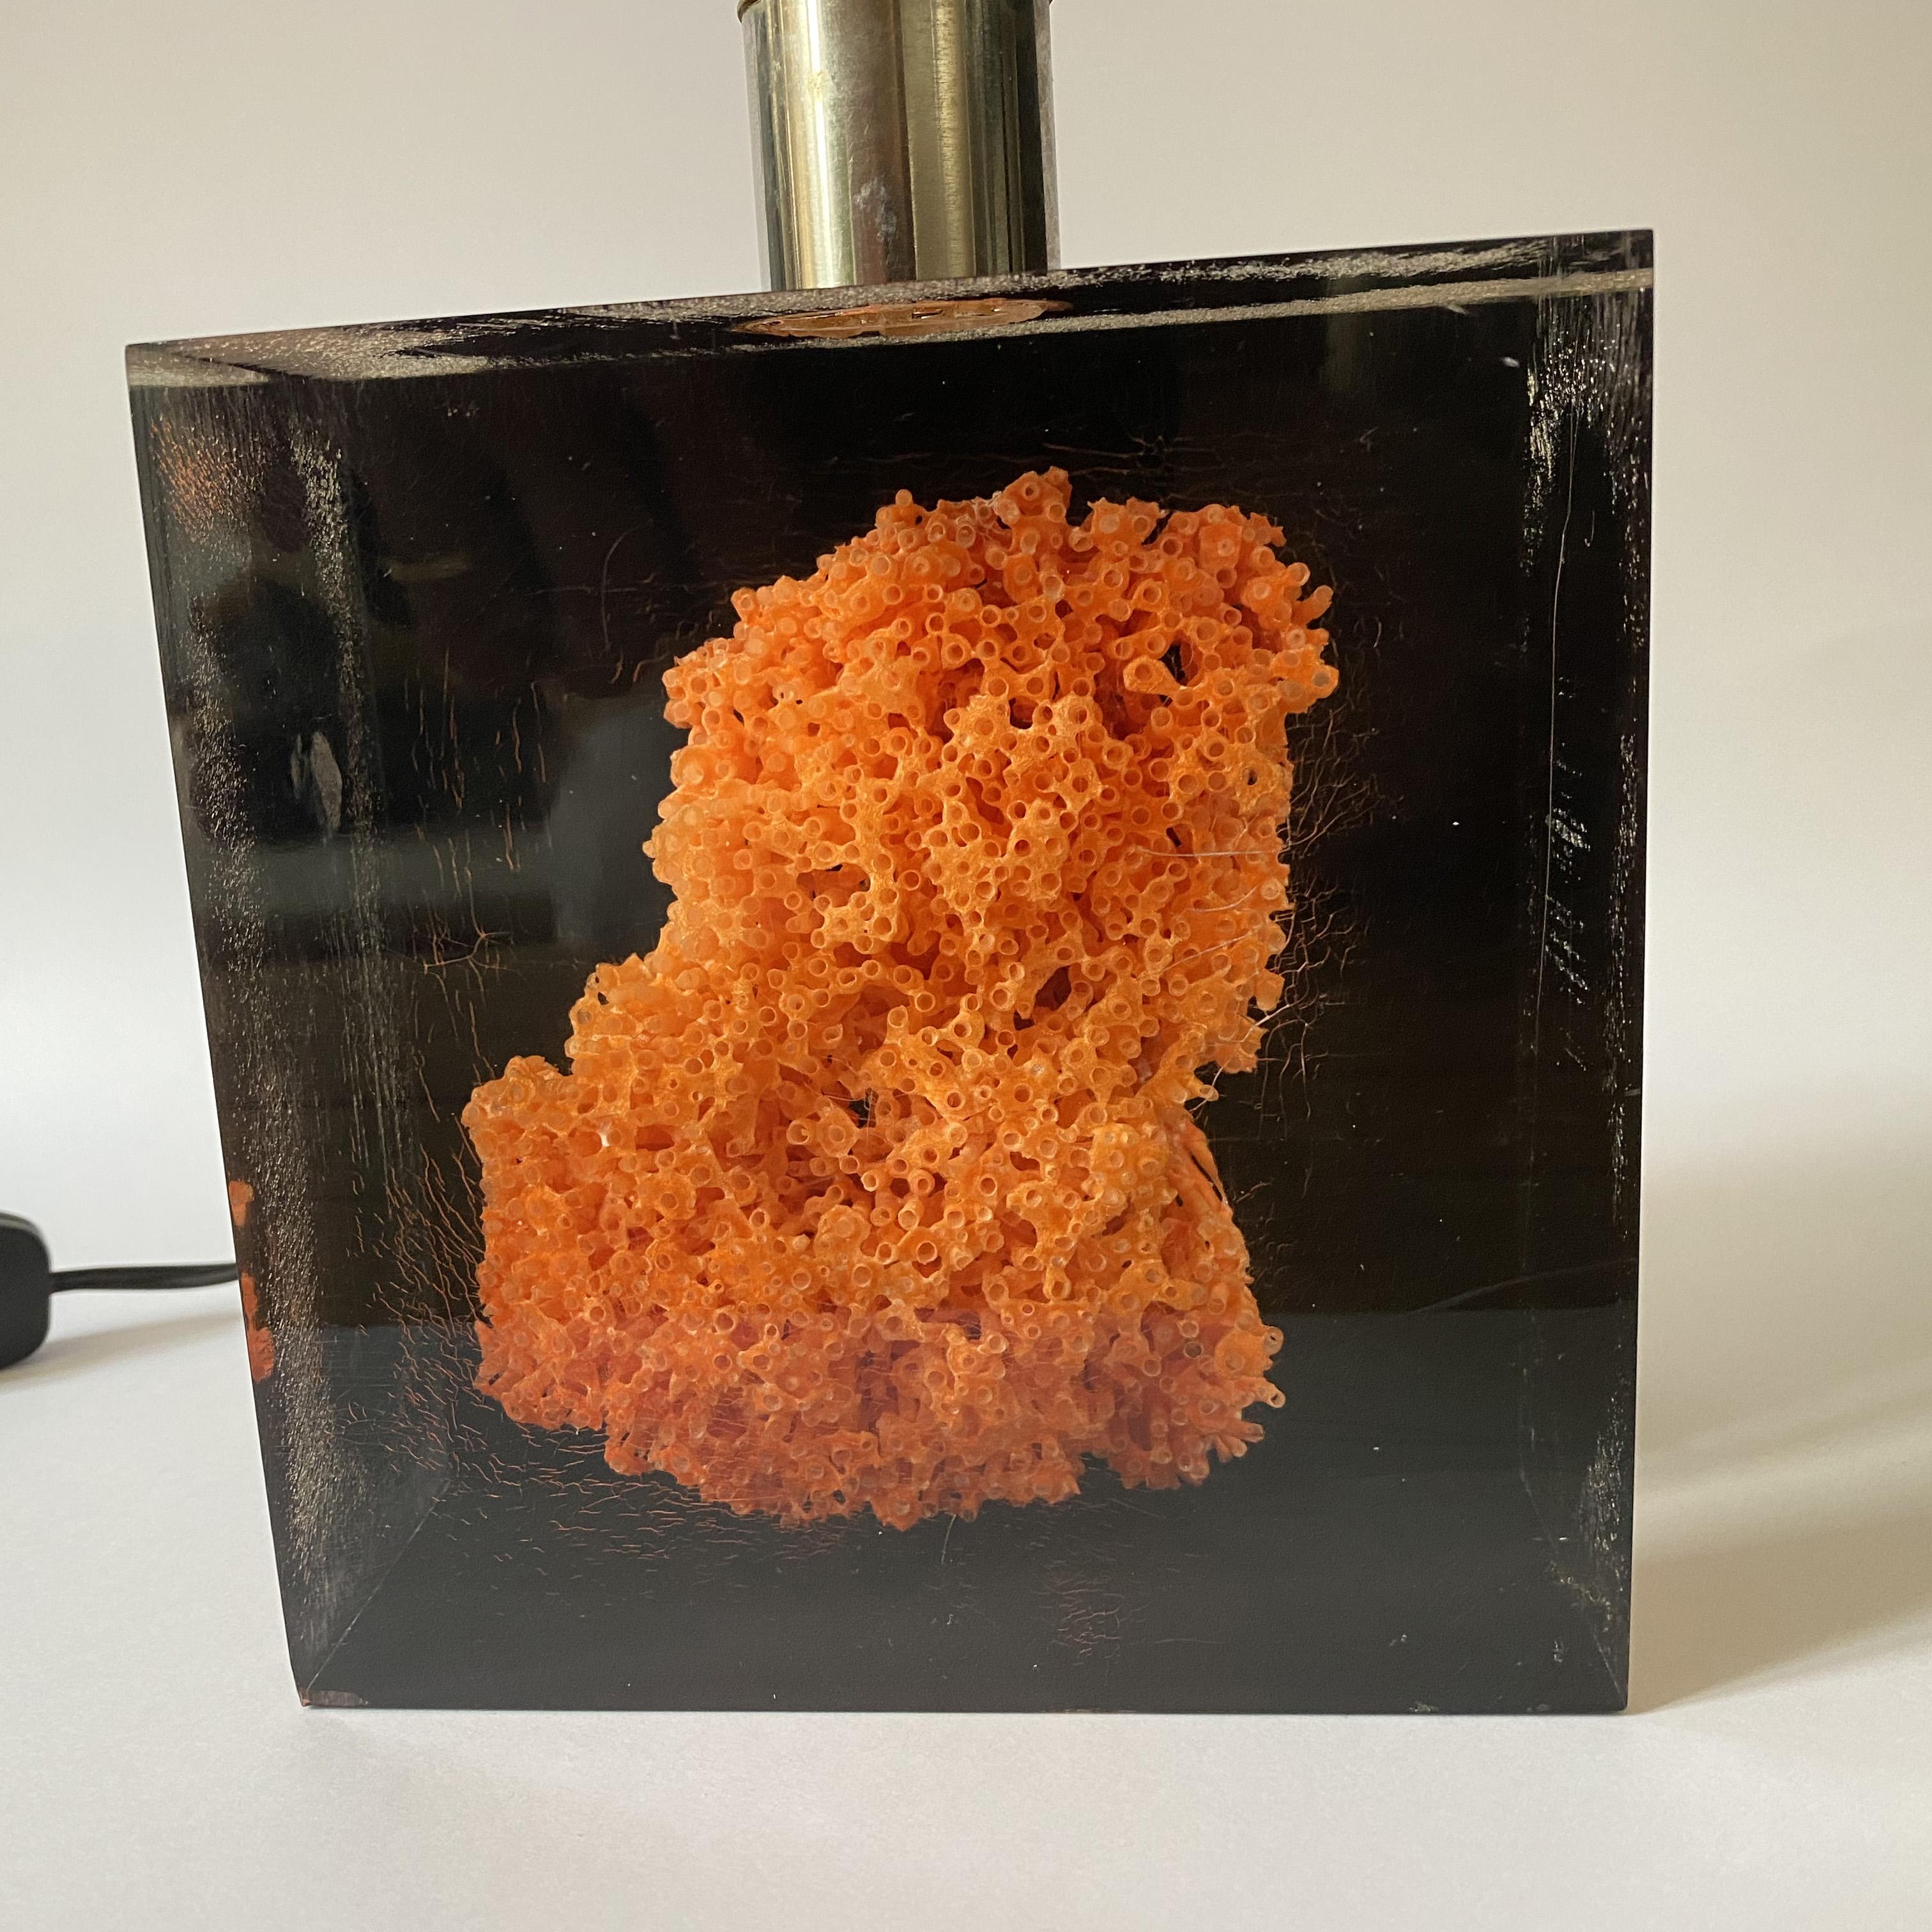 Acrylic Resin with Coral Inclusion Table Lamp by Pierre Giraudon, 1970s.
Good condition, some scratches and cracks.